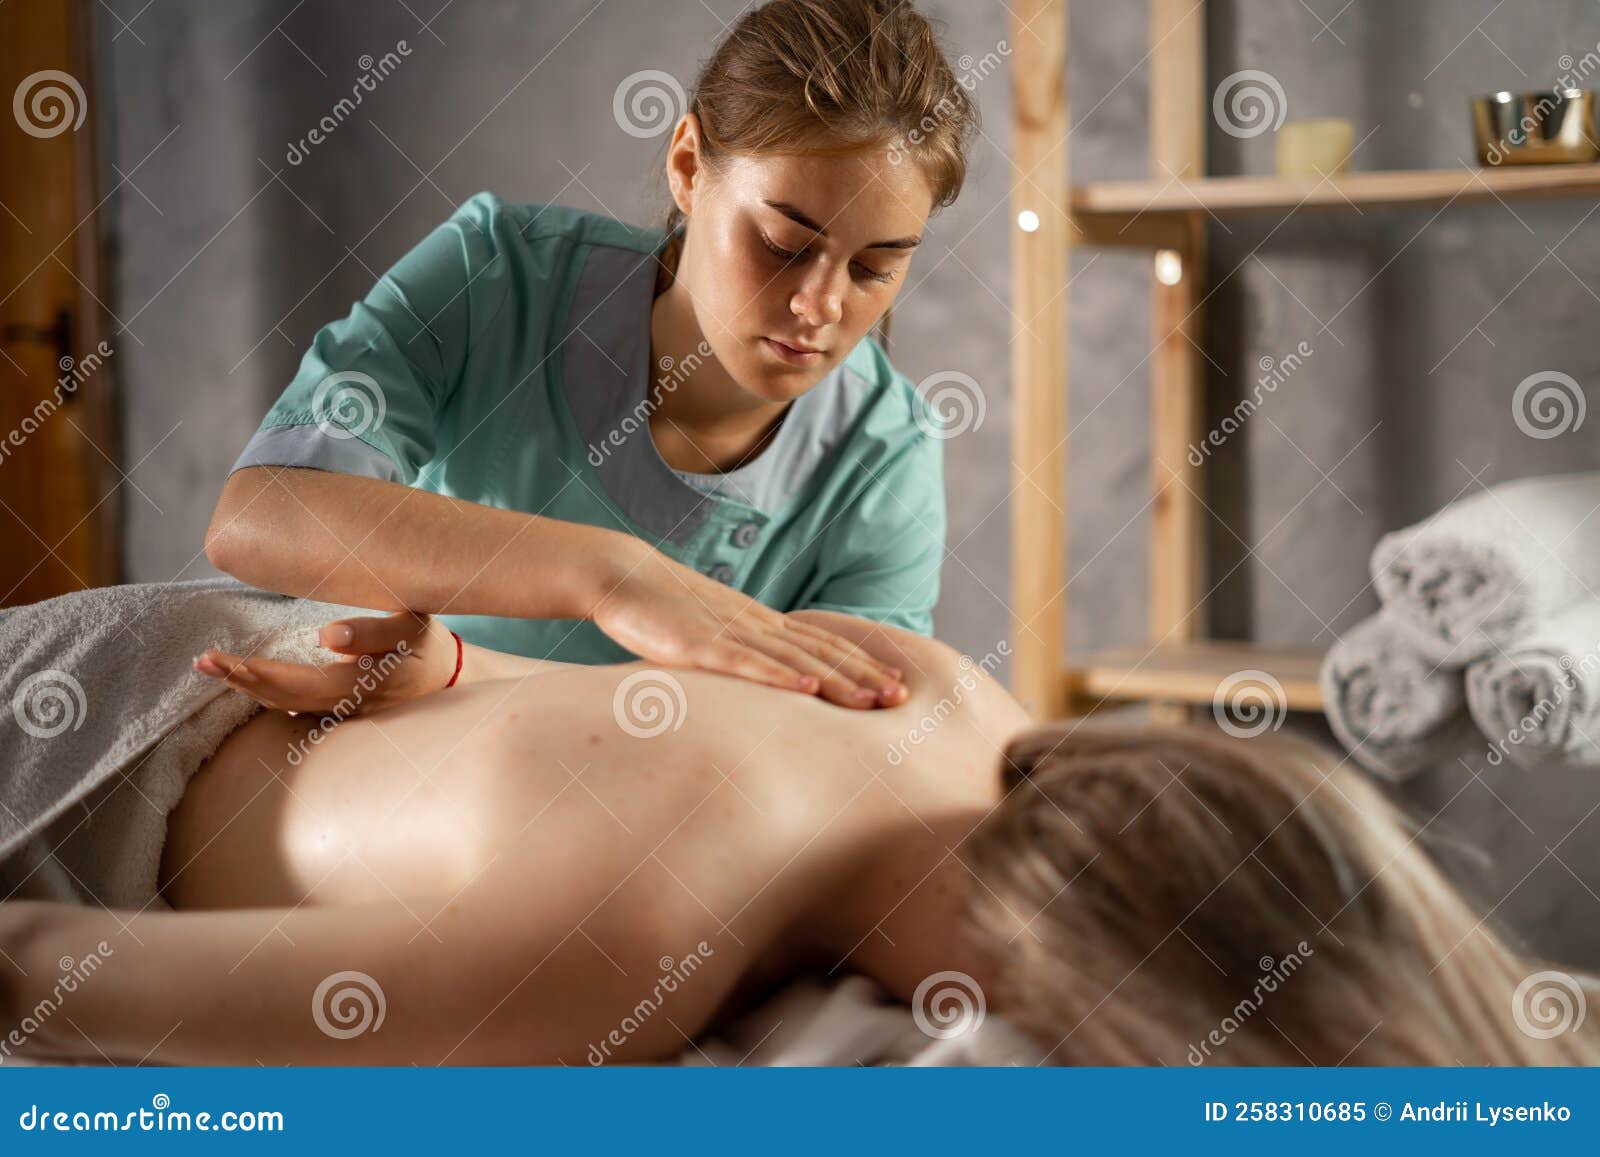 masseur massaging shoulder of young woman. female patient getting remedial body and shoulder blade massage easing pain